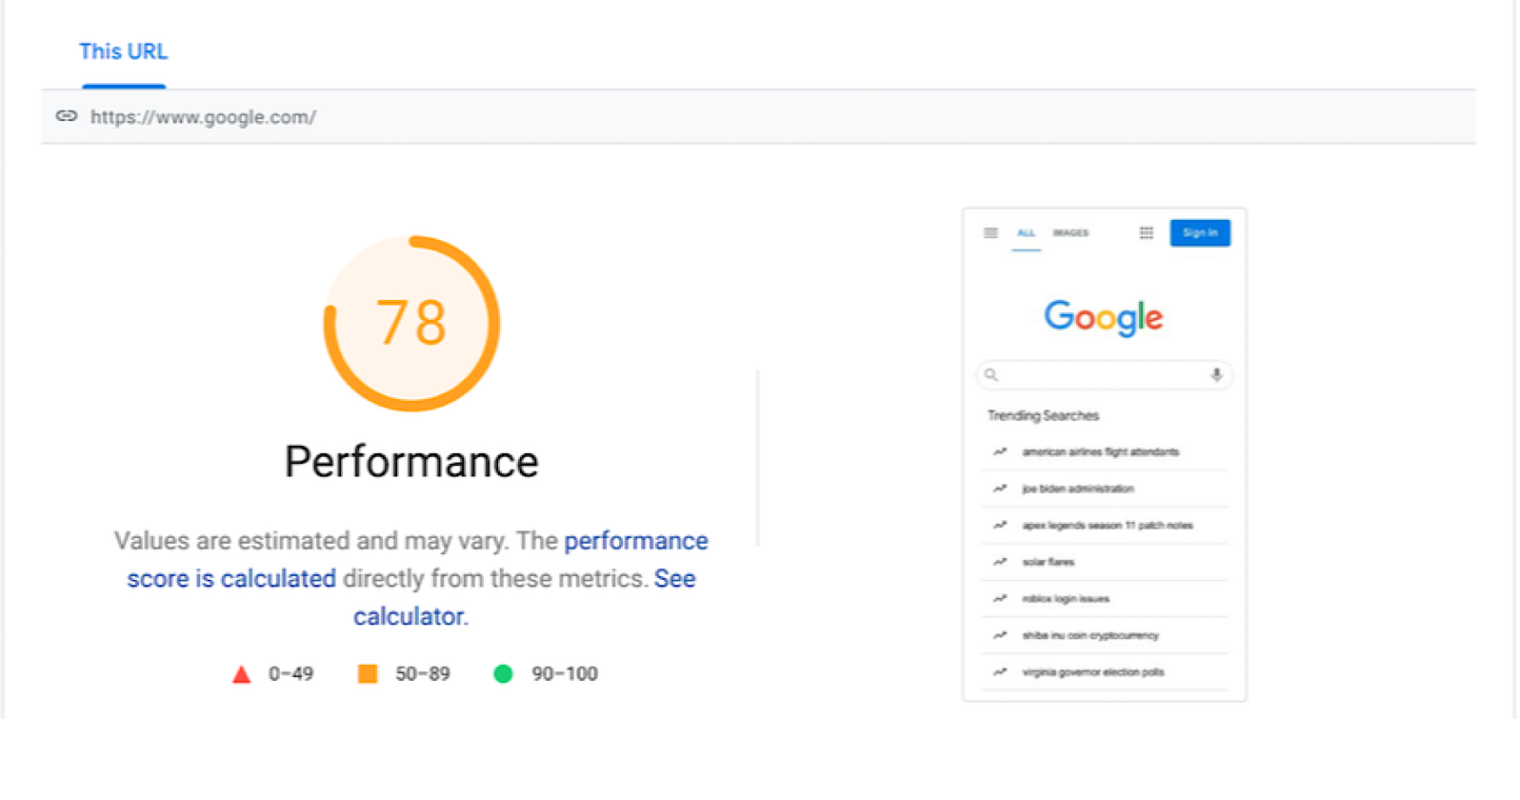 PageSpeed Insights is now being updated by Google